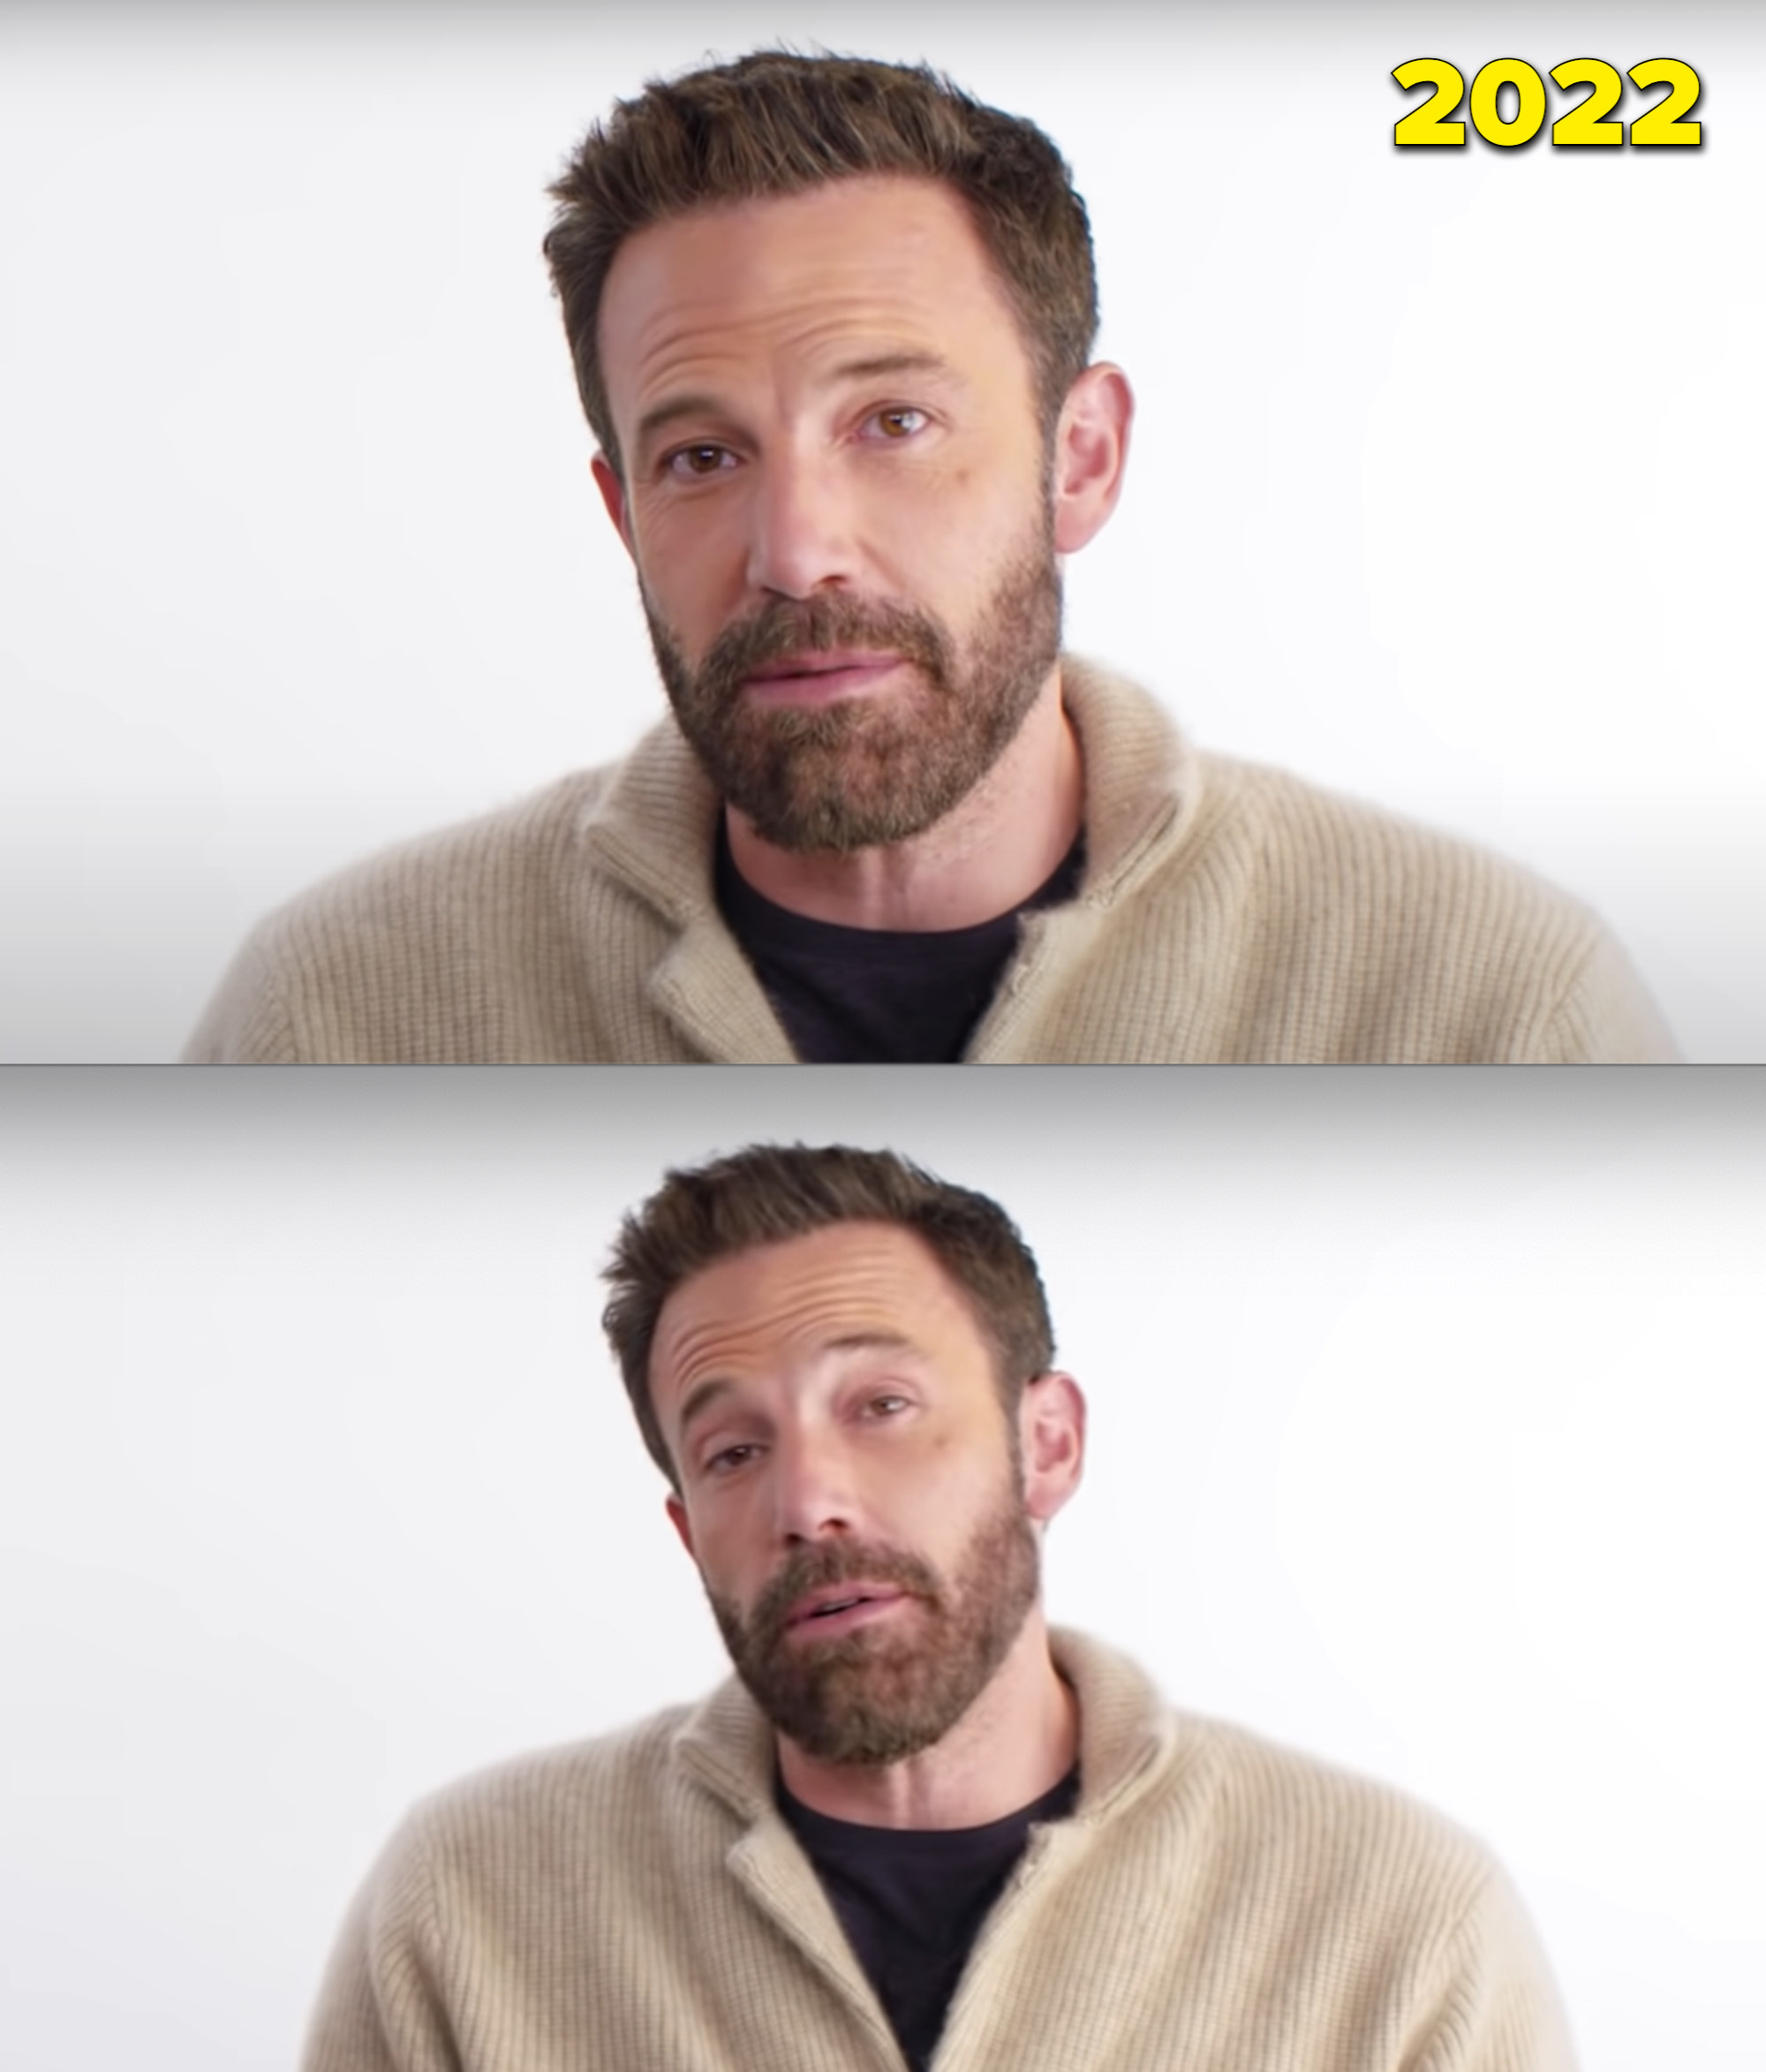 Ben Affleck being interviewed in front of a white backdrop in 2022